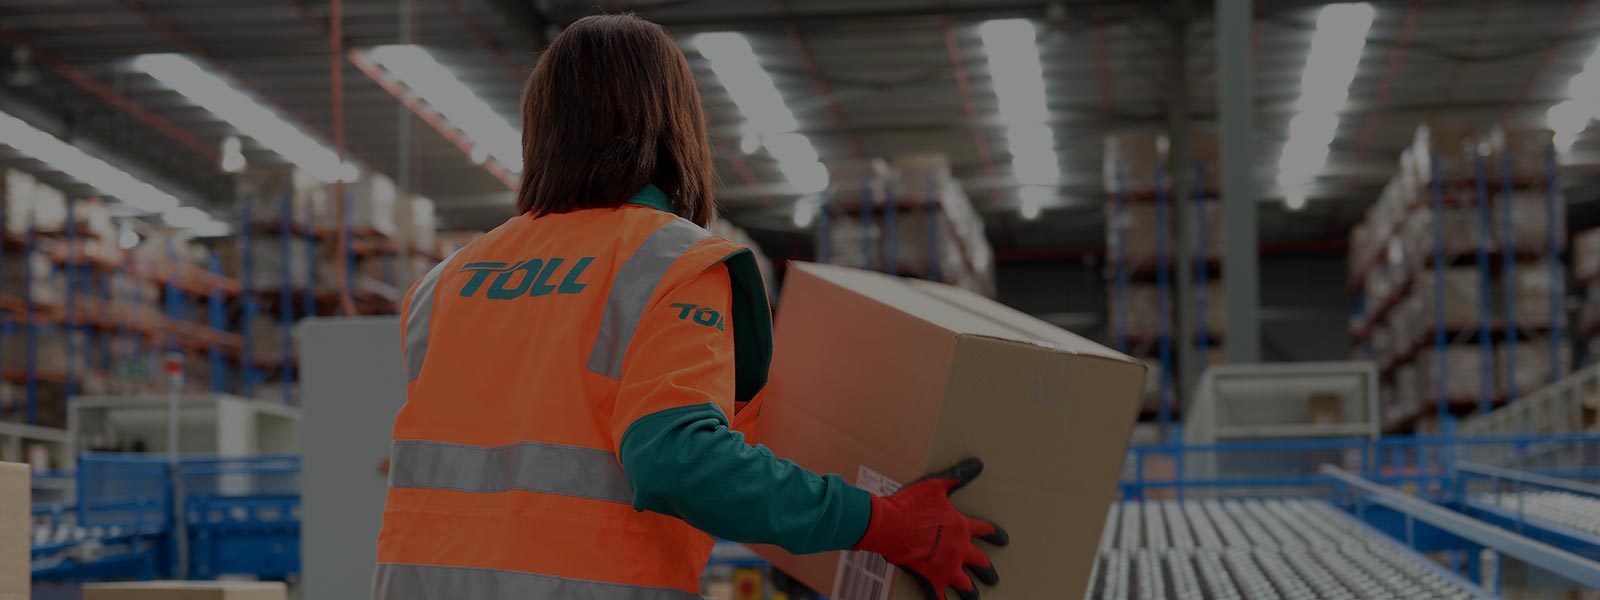 Woman in high vis jacket with ‘TOLL’ written on the back. Her back is facing the camera and she is in a warehouse moving boxes